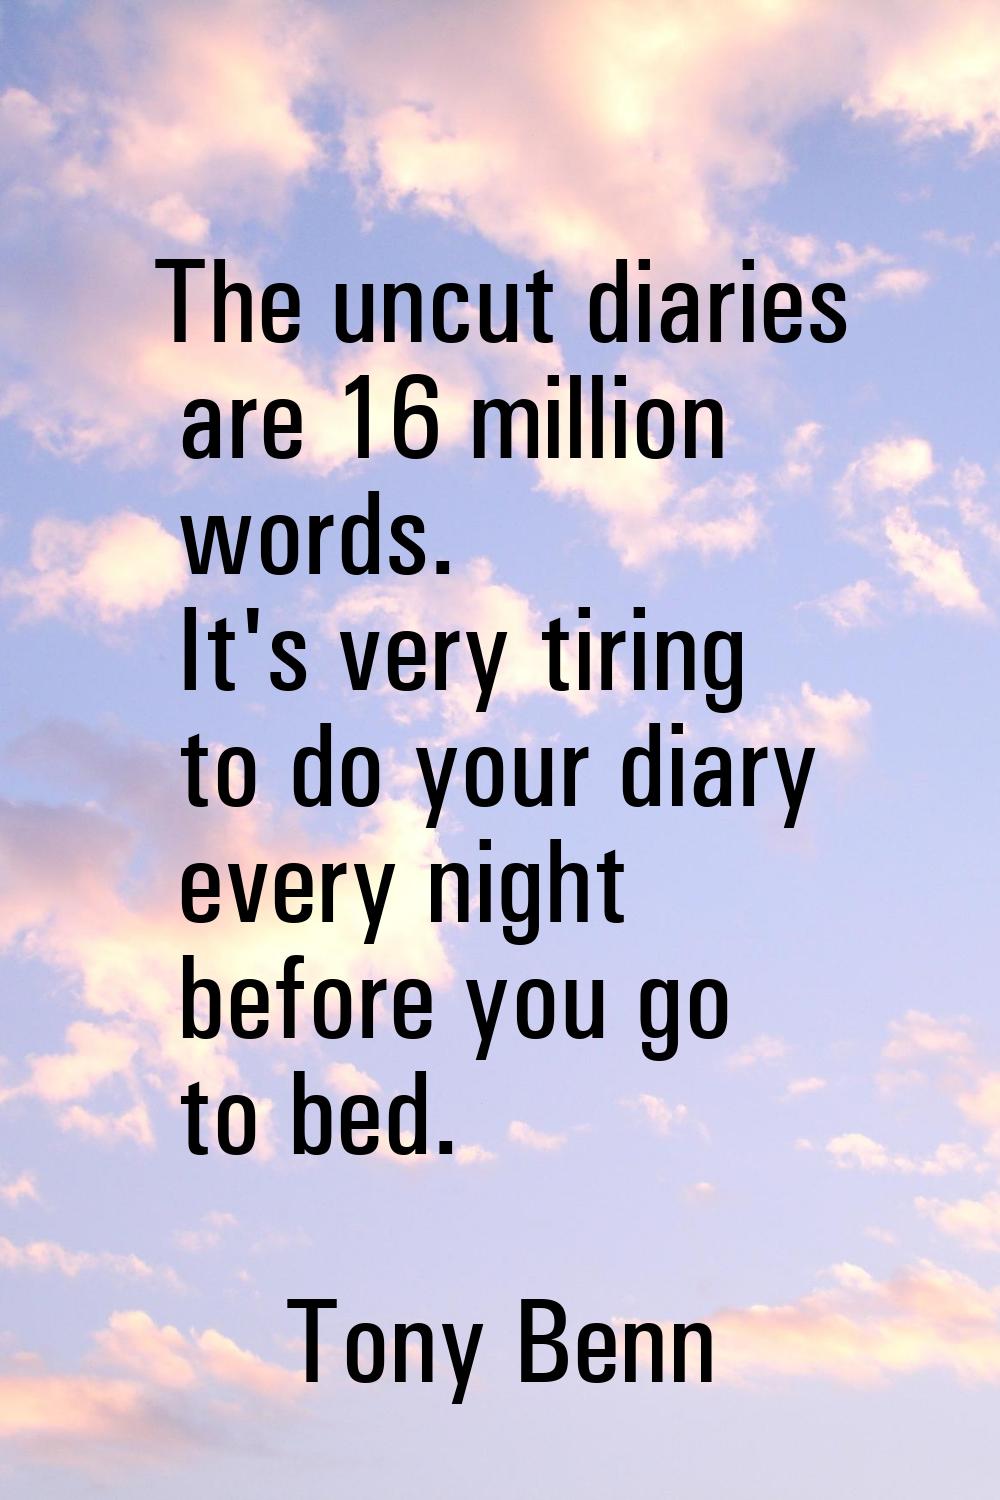 The uncut diaries are 16 million words. It's very tiring to do your diary every night before you go